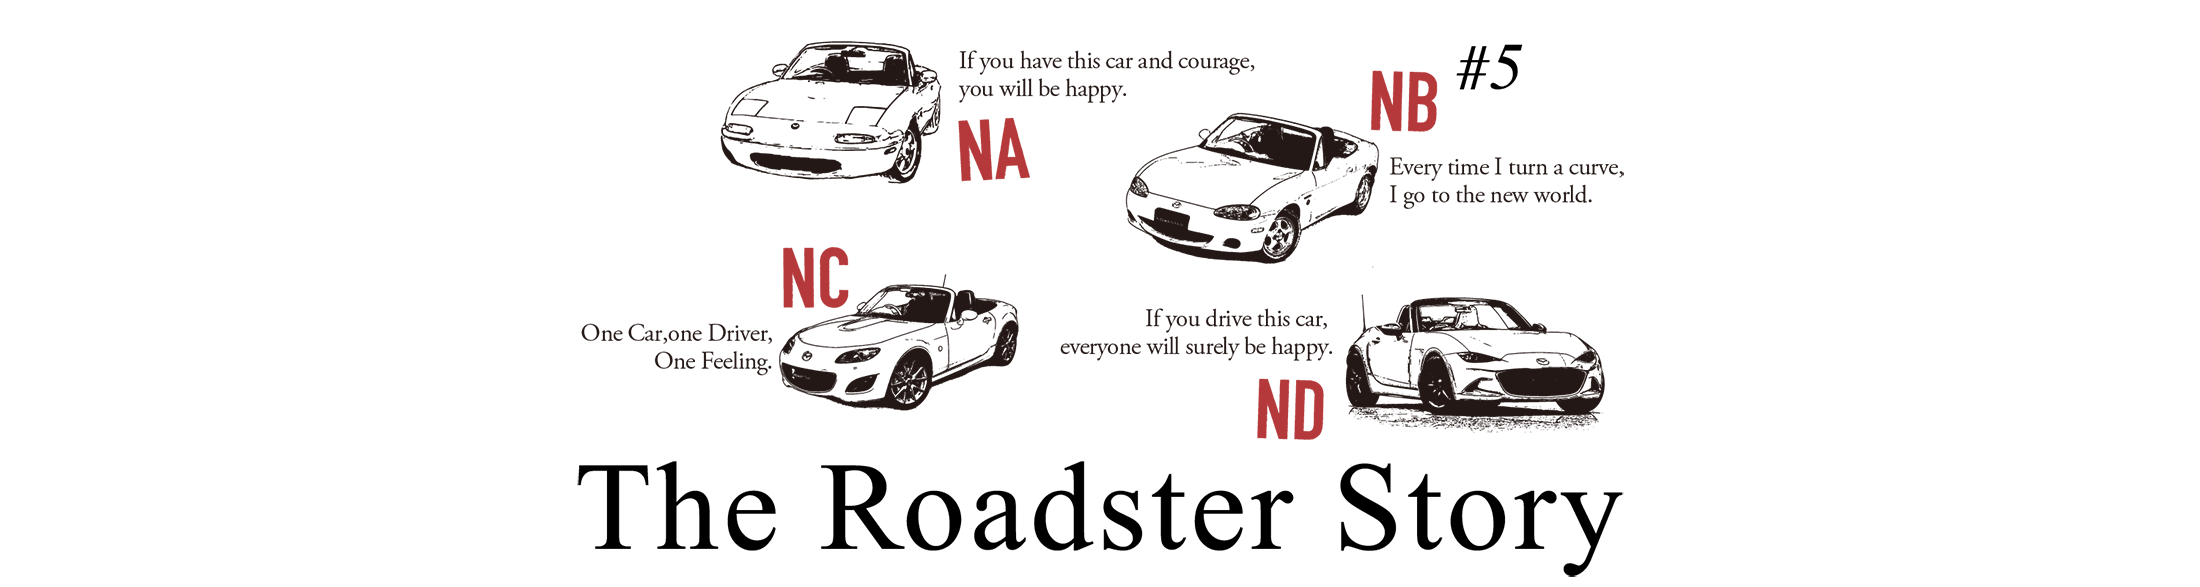 The Roadster Story #5 Essential Open Style／NA, NB, NC, ND